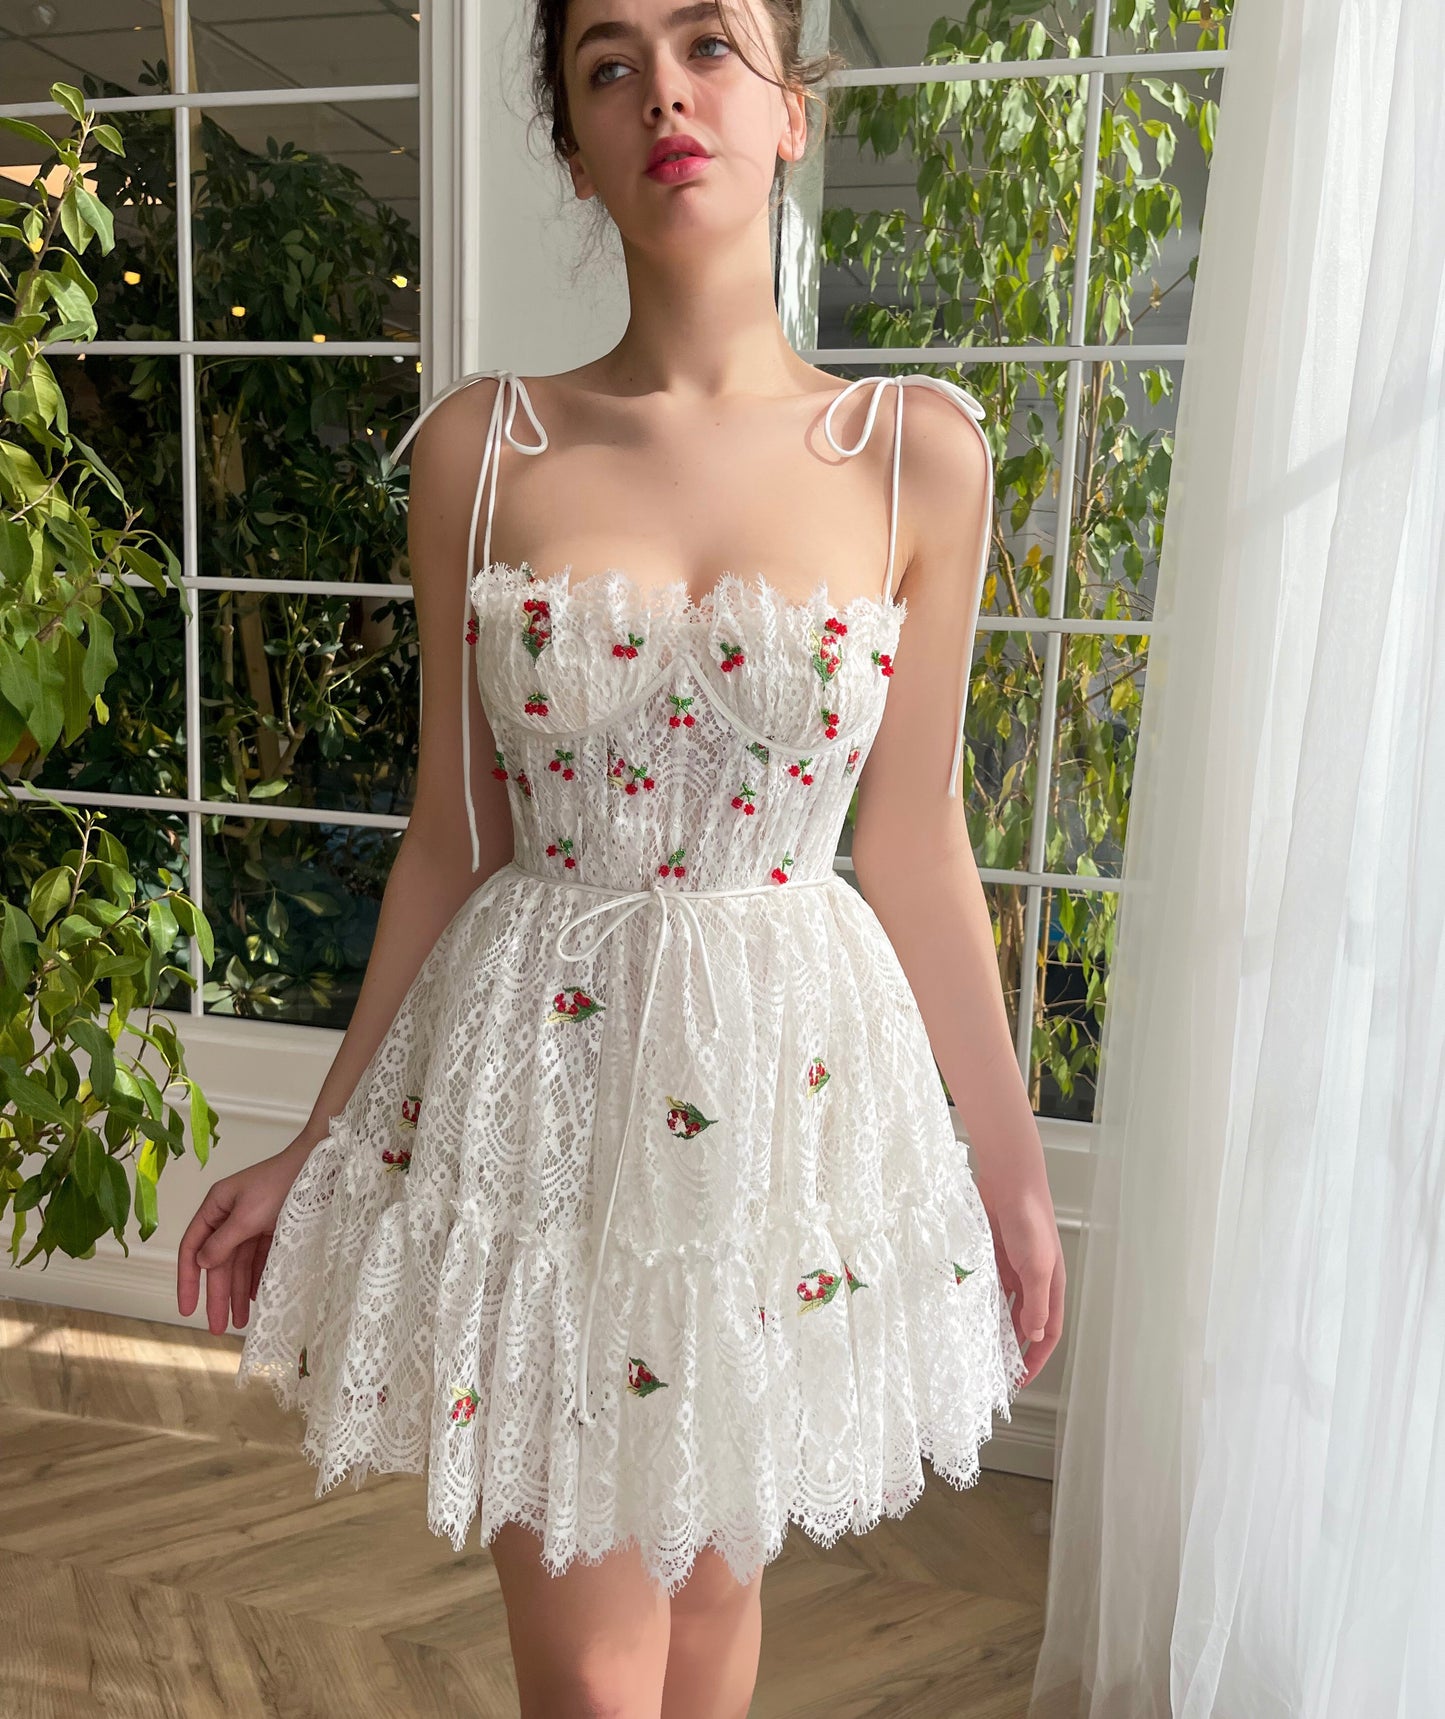 White mini dress with spaghetti straps and embroidered cherries